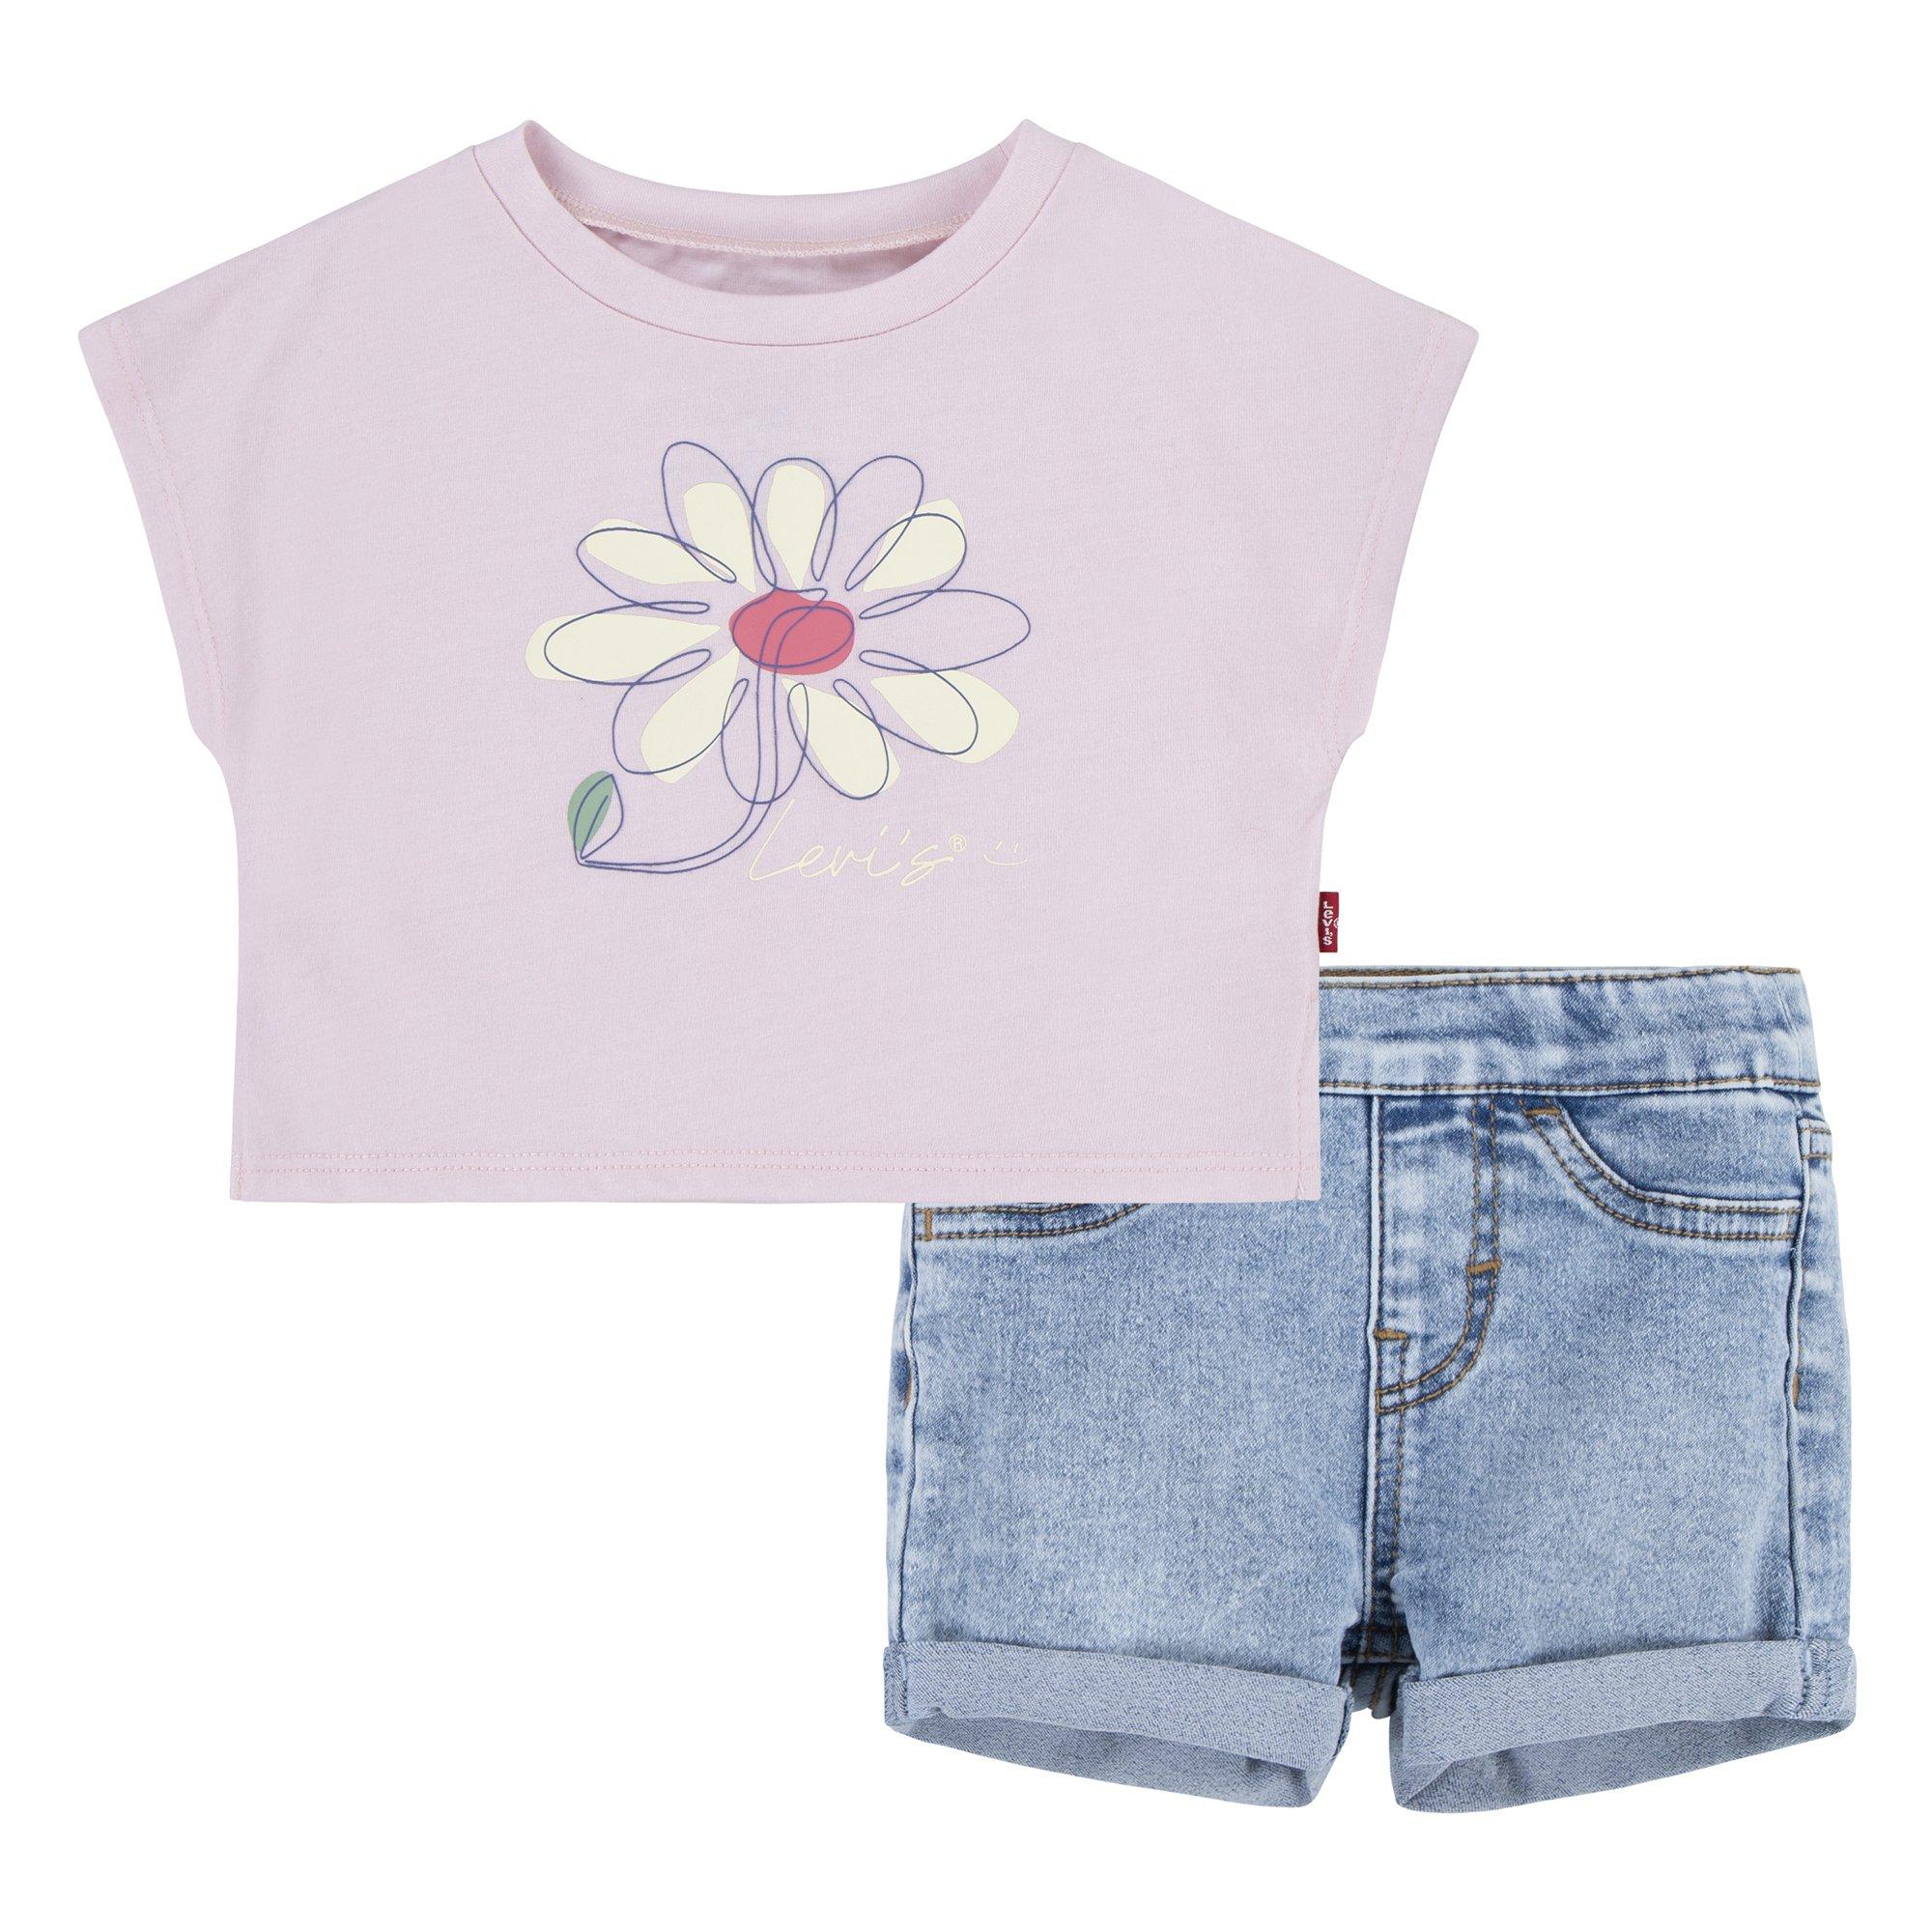 Levi's Baby Girls 2 pc. Floral Dolman Tee And Short Set